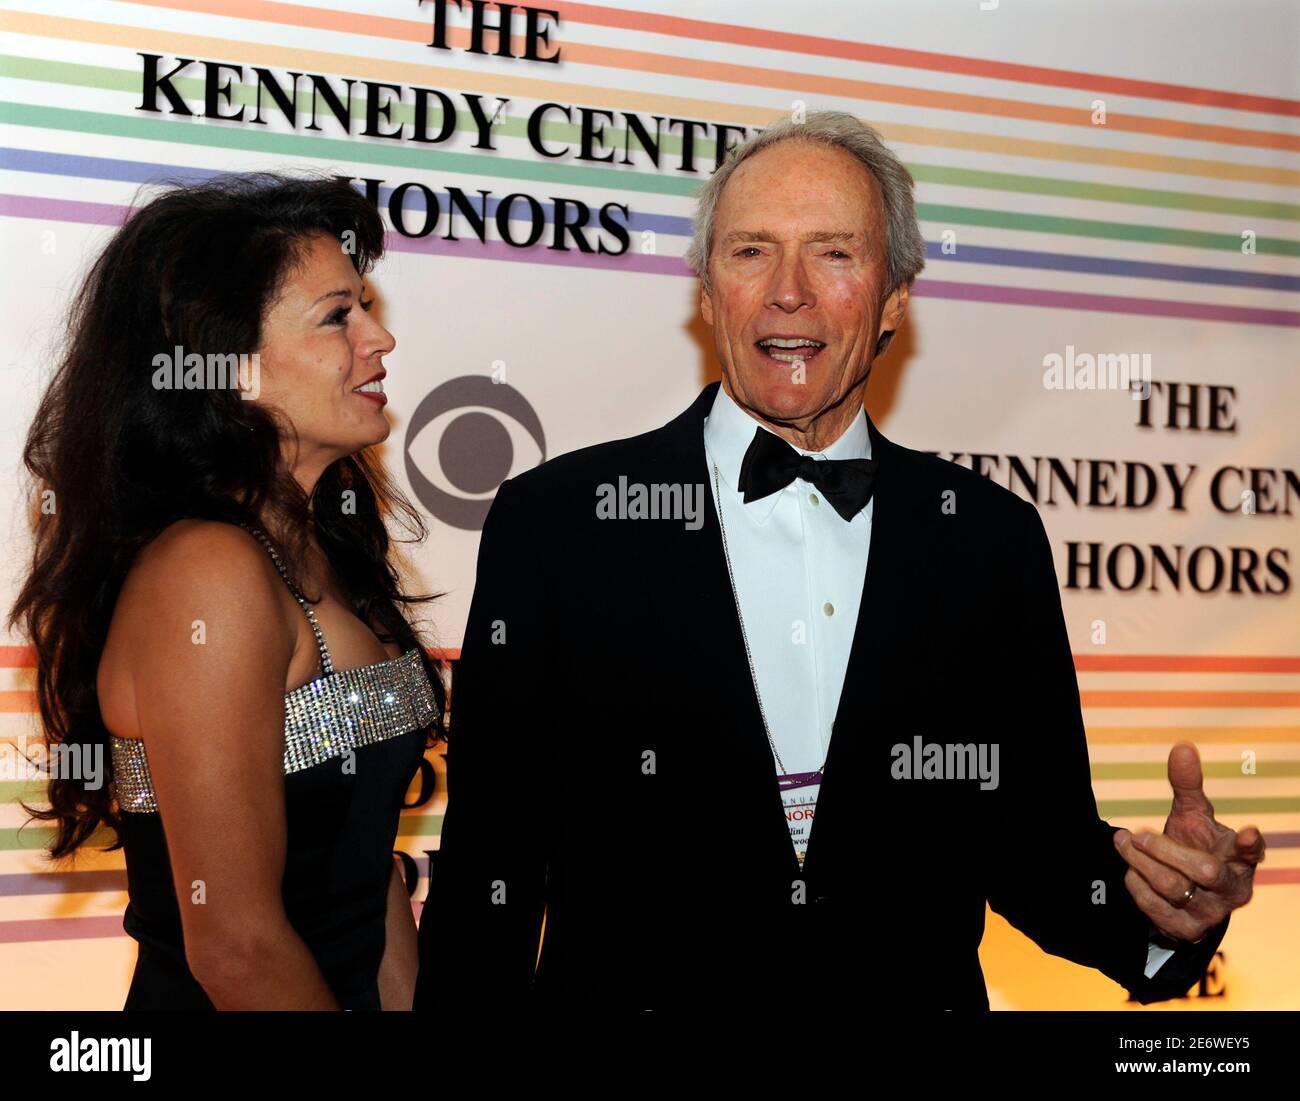 Former Kennedy Center Honoree actor and director Clint Eastwood holds hands with his wife Dina Ruiz as they arrive at the Kennedy Center for the Gala in Washington December 7, 2008. The 31st Annual Kennedy Center Honors awards are given for lifetime achievement in the performing arts.  REUTERS/Mike Theiler (UNITED STATES) Stock Photo